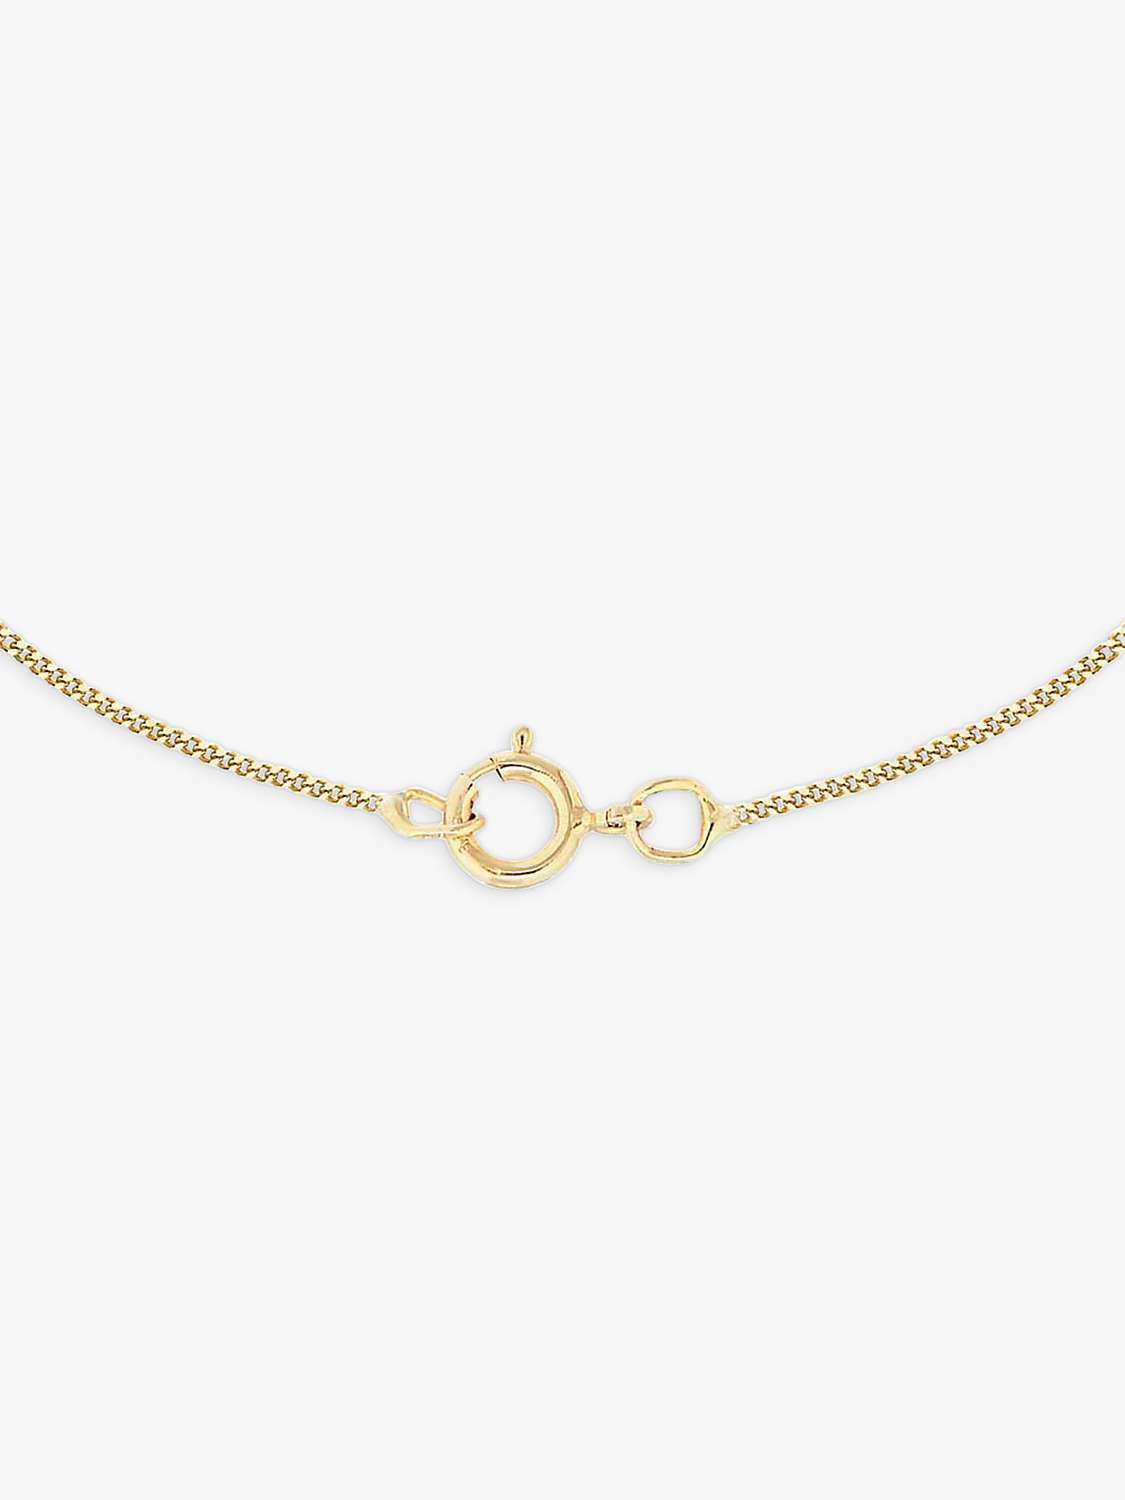 Buy IBB 9ct Yellow Gold Long Curb Link Chain Necklace, Gold Online at johnlewis.com